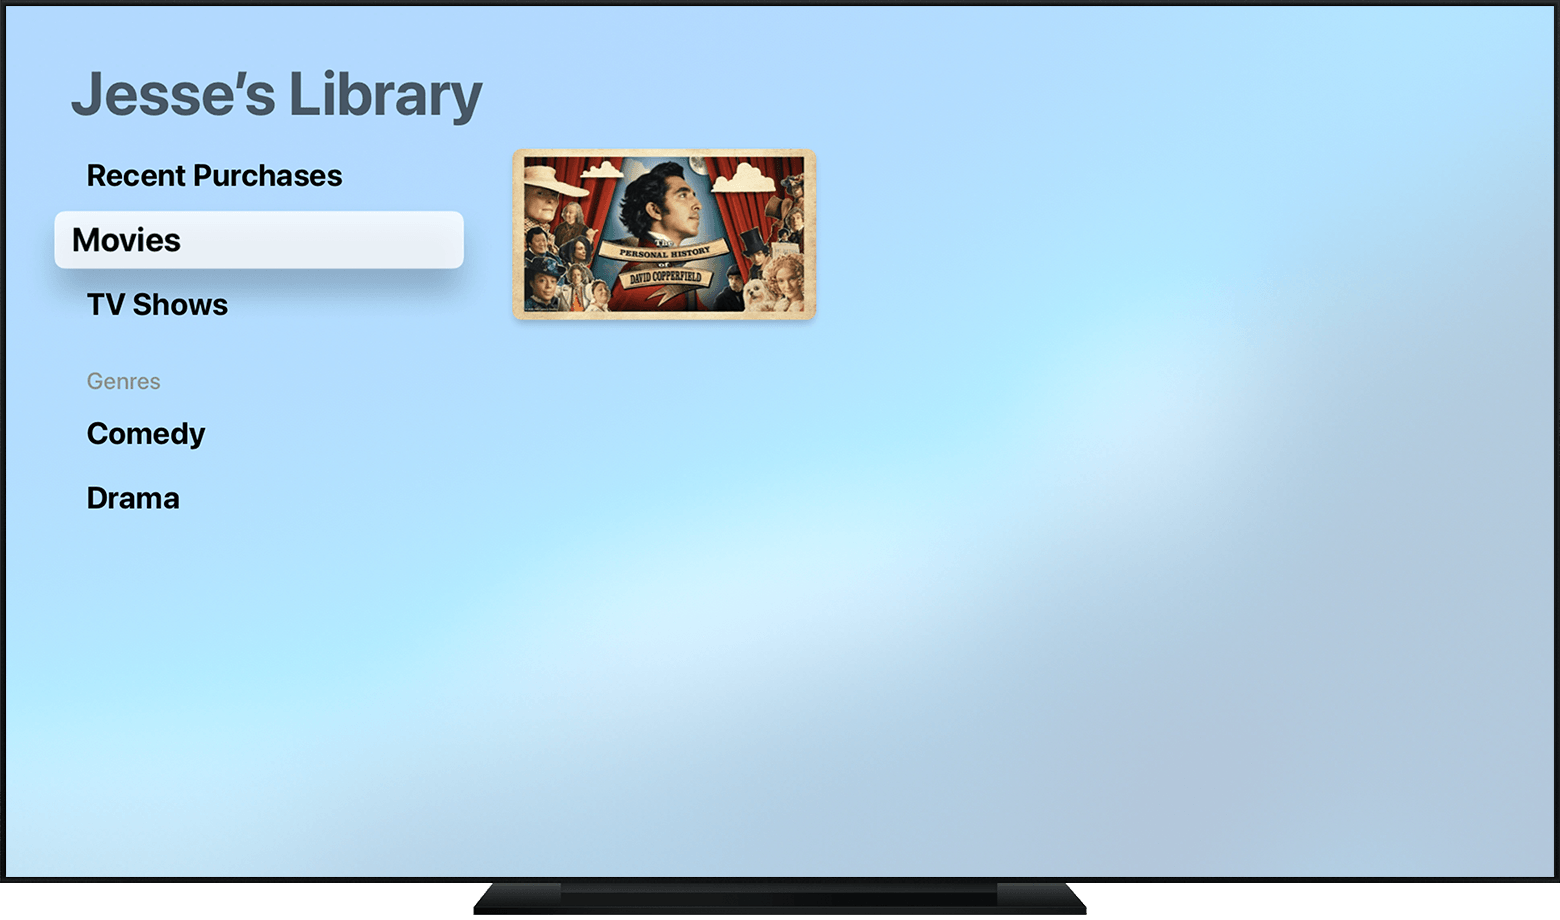 Apple TV showing movies in Jesse's library.